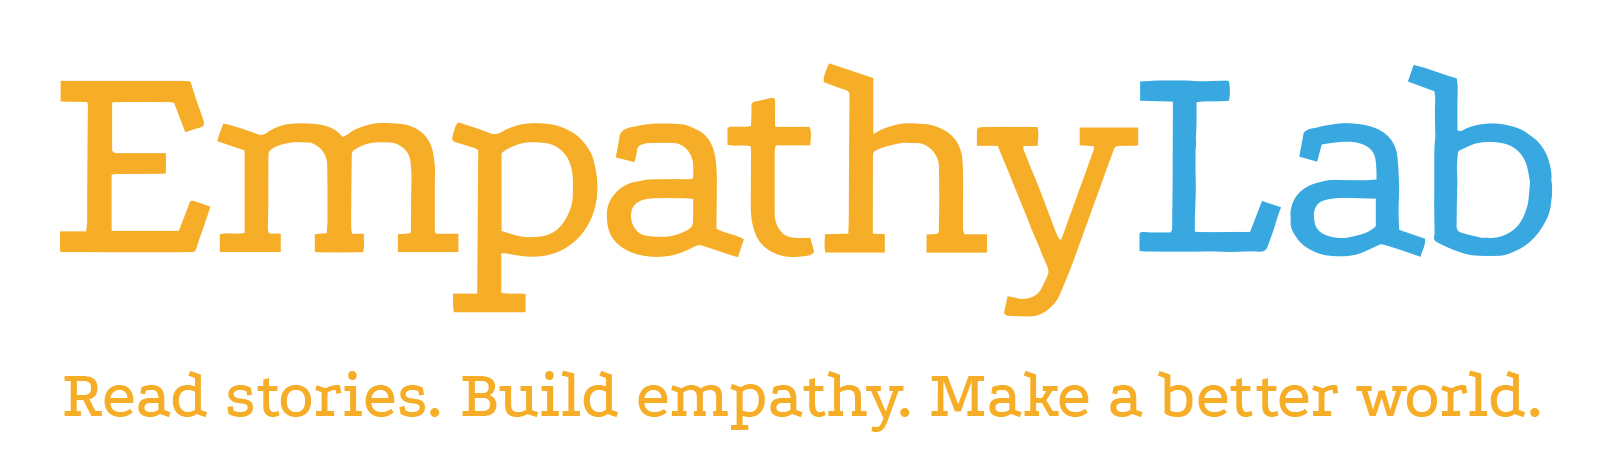 Secondary Read for Empathy collection 2021